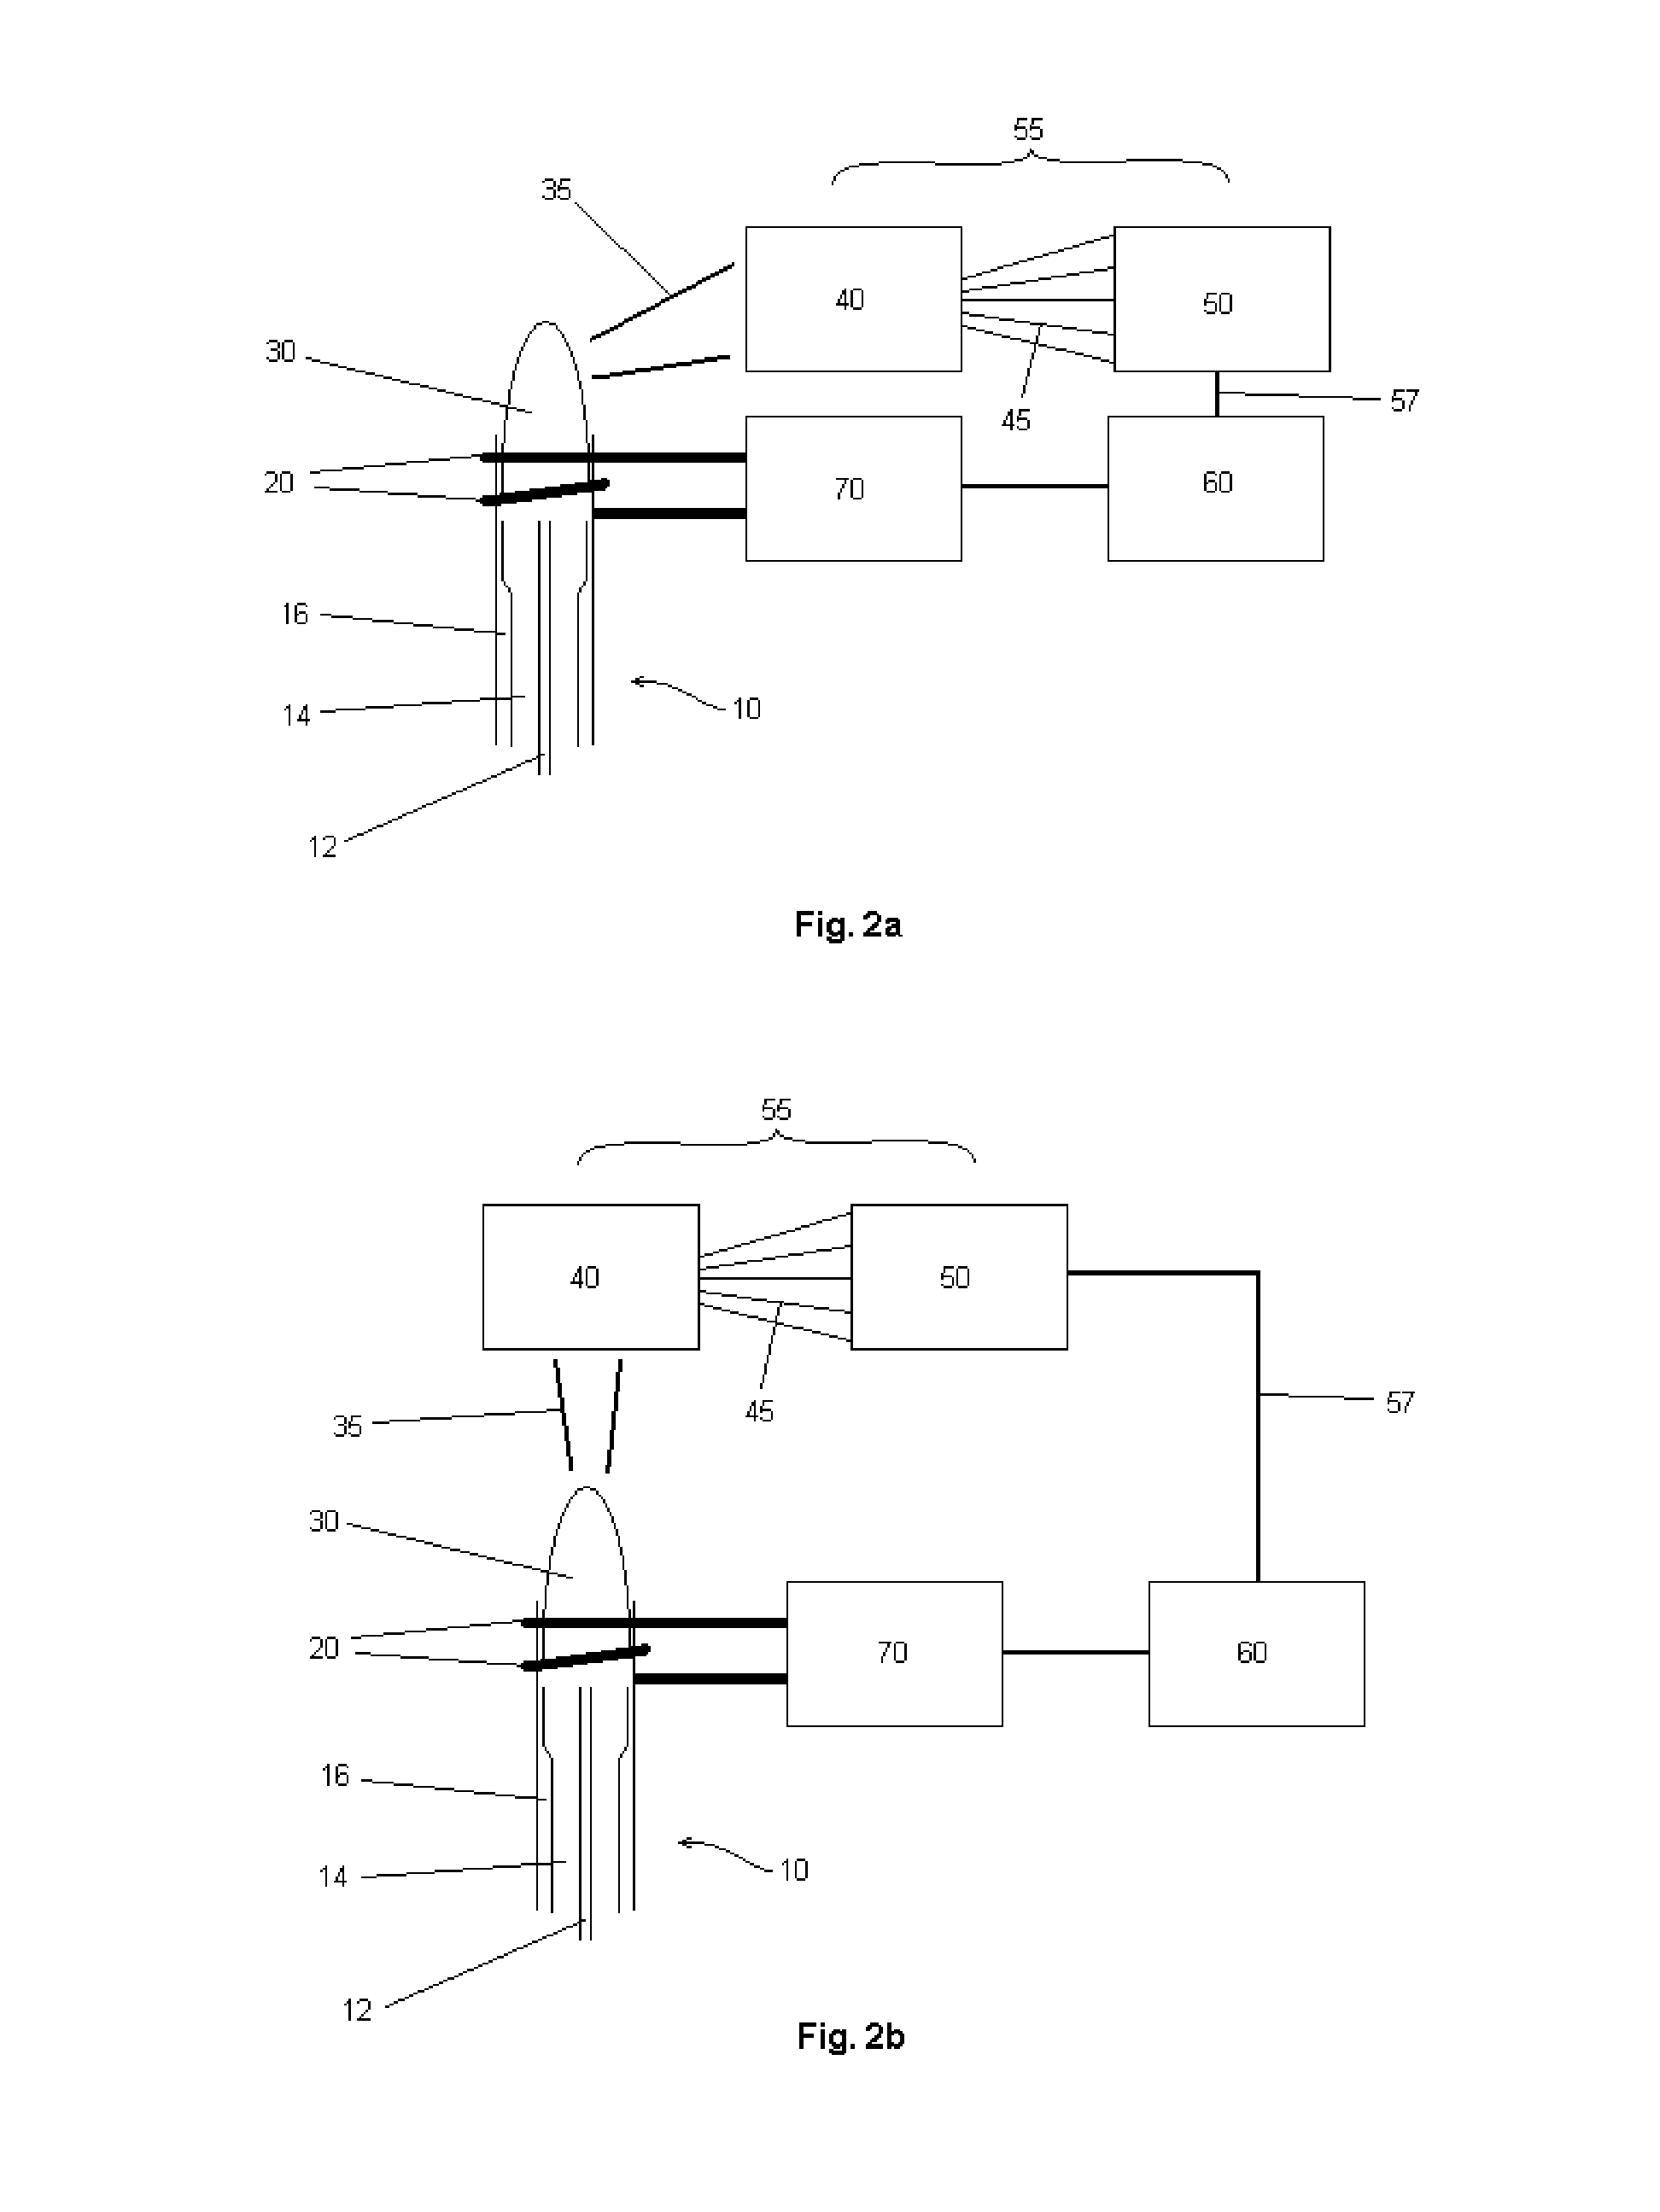 Method and apparatus for control of a plasma for spectrometry